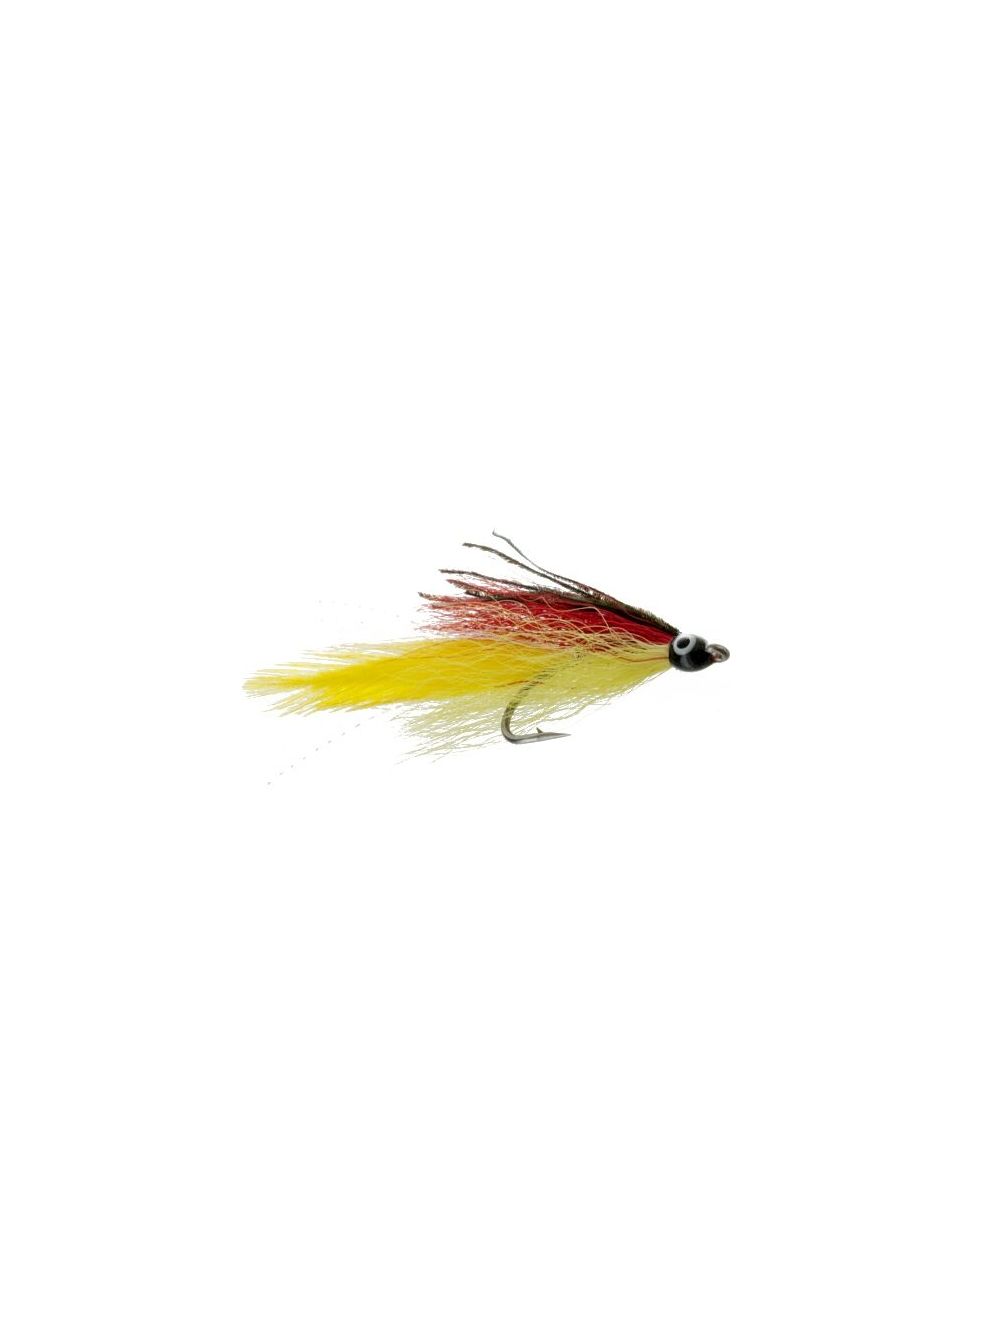 https://eadn-wc02-1020161.nxedge.io/cdn/media/catalog/product/cache/32b930e20bfef0c9badd7ee253a86131/d/e/deceiver-red-and-yellow-fly-fishing-flies-saltwater_preview.jpeg